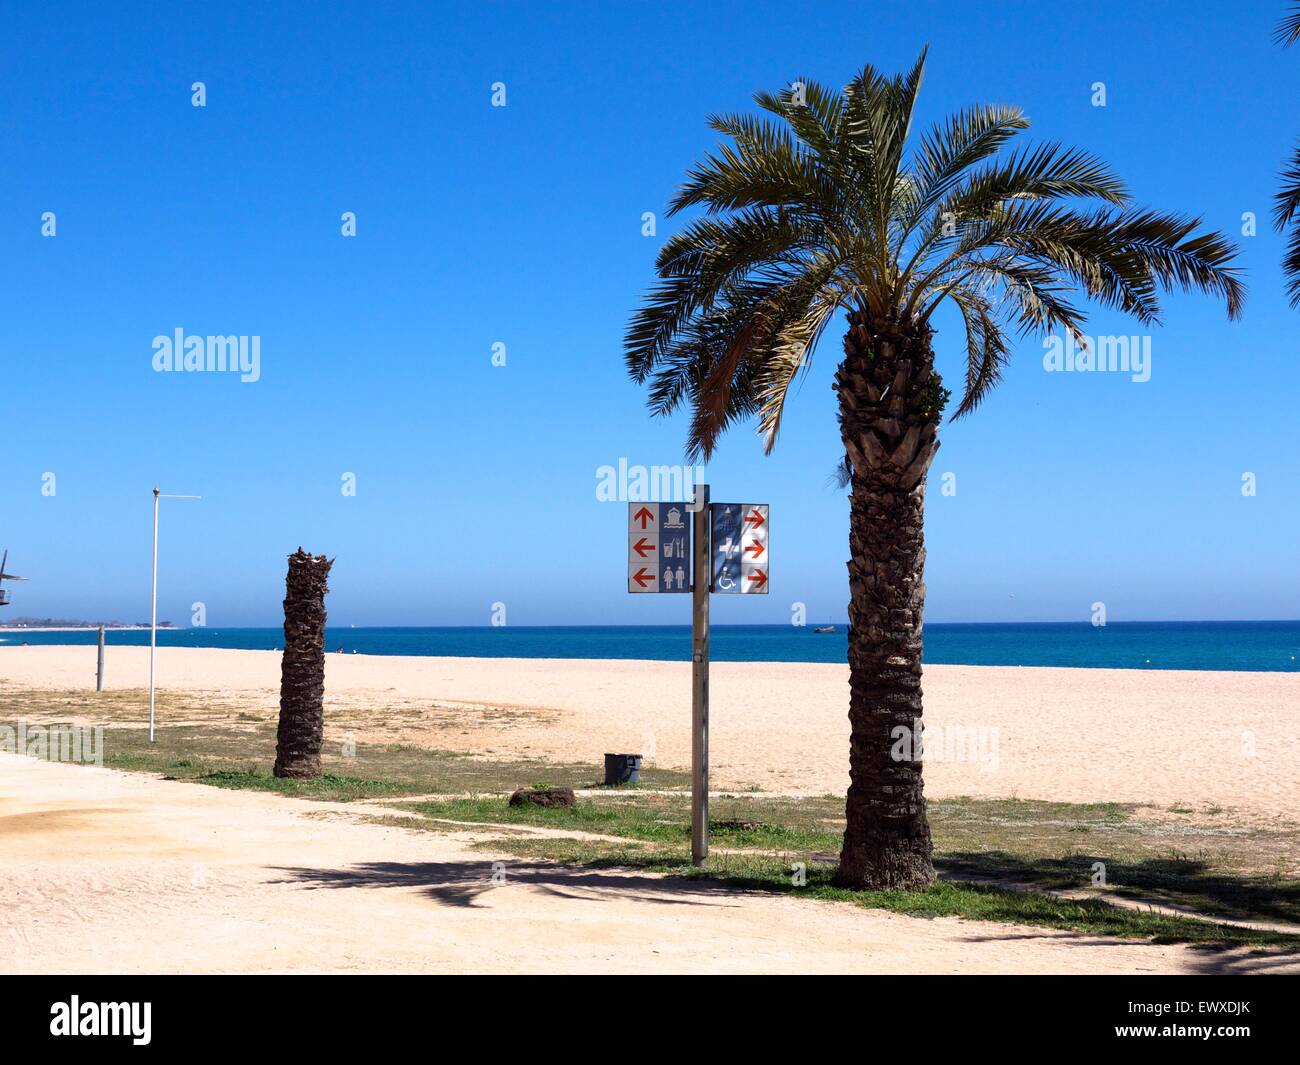 Palm tree next to a sign on a beach in Spain Stock Photo